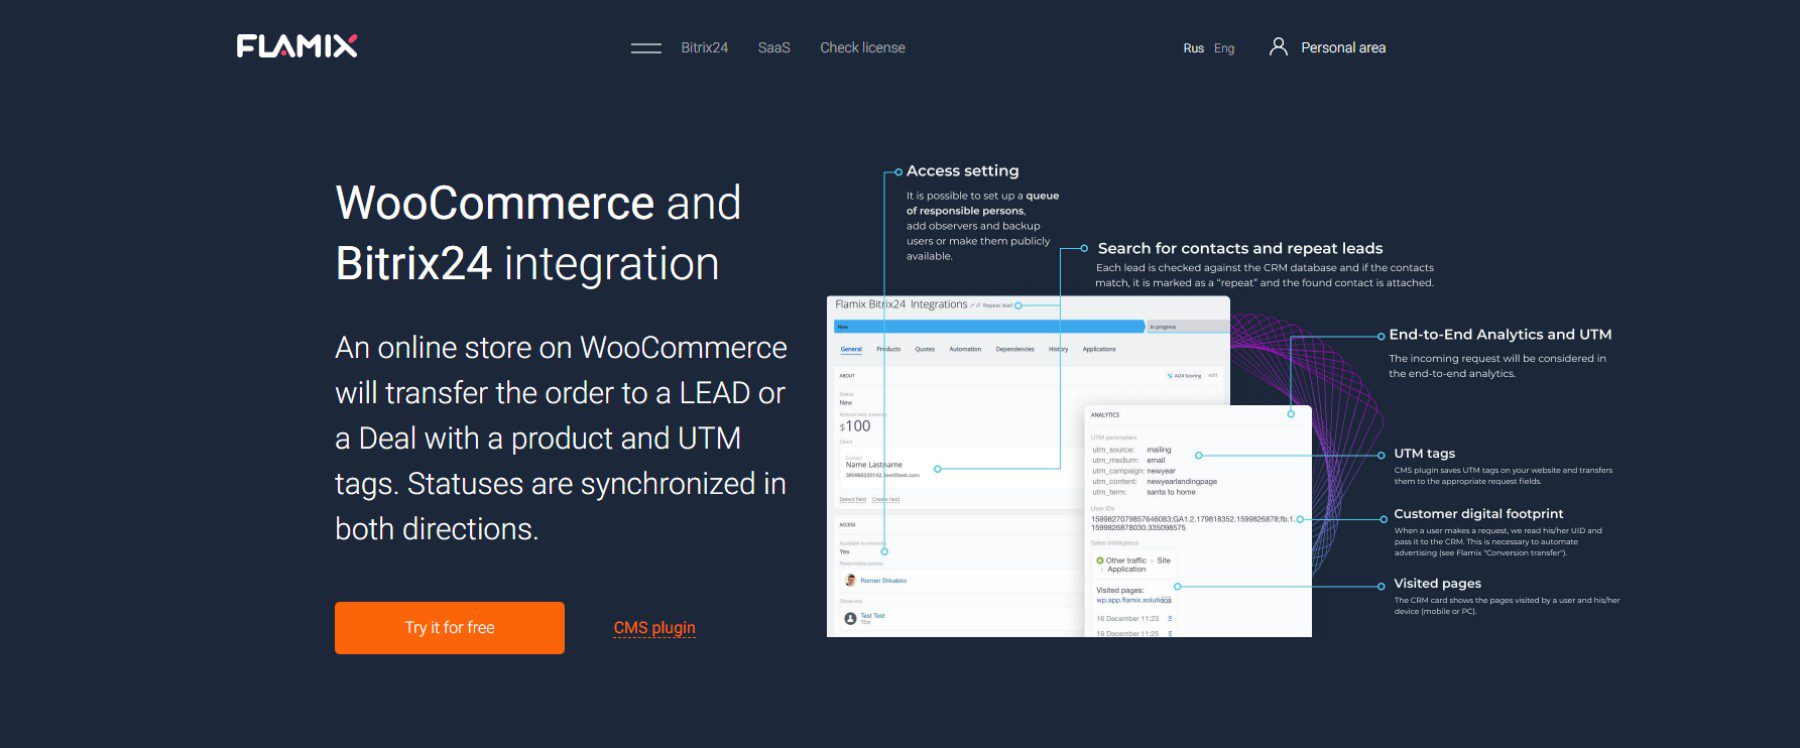 Connect Bitrix24 to WooCommerce with Flamix